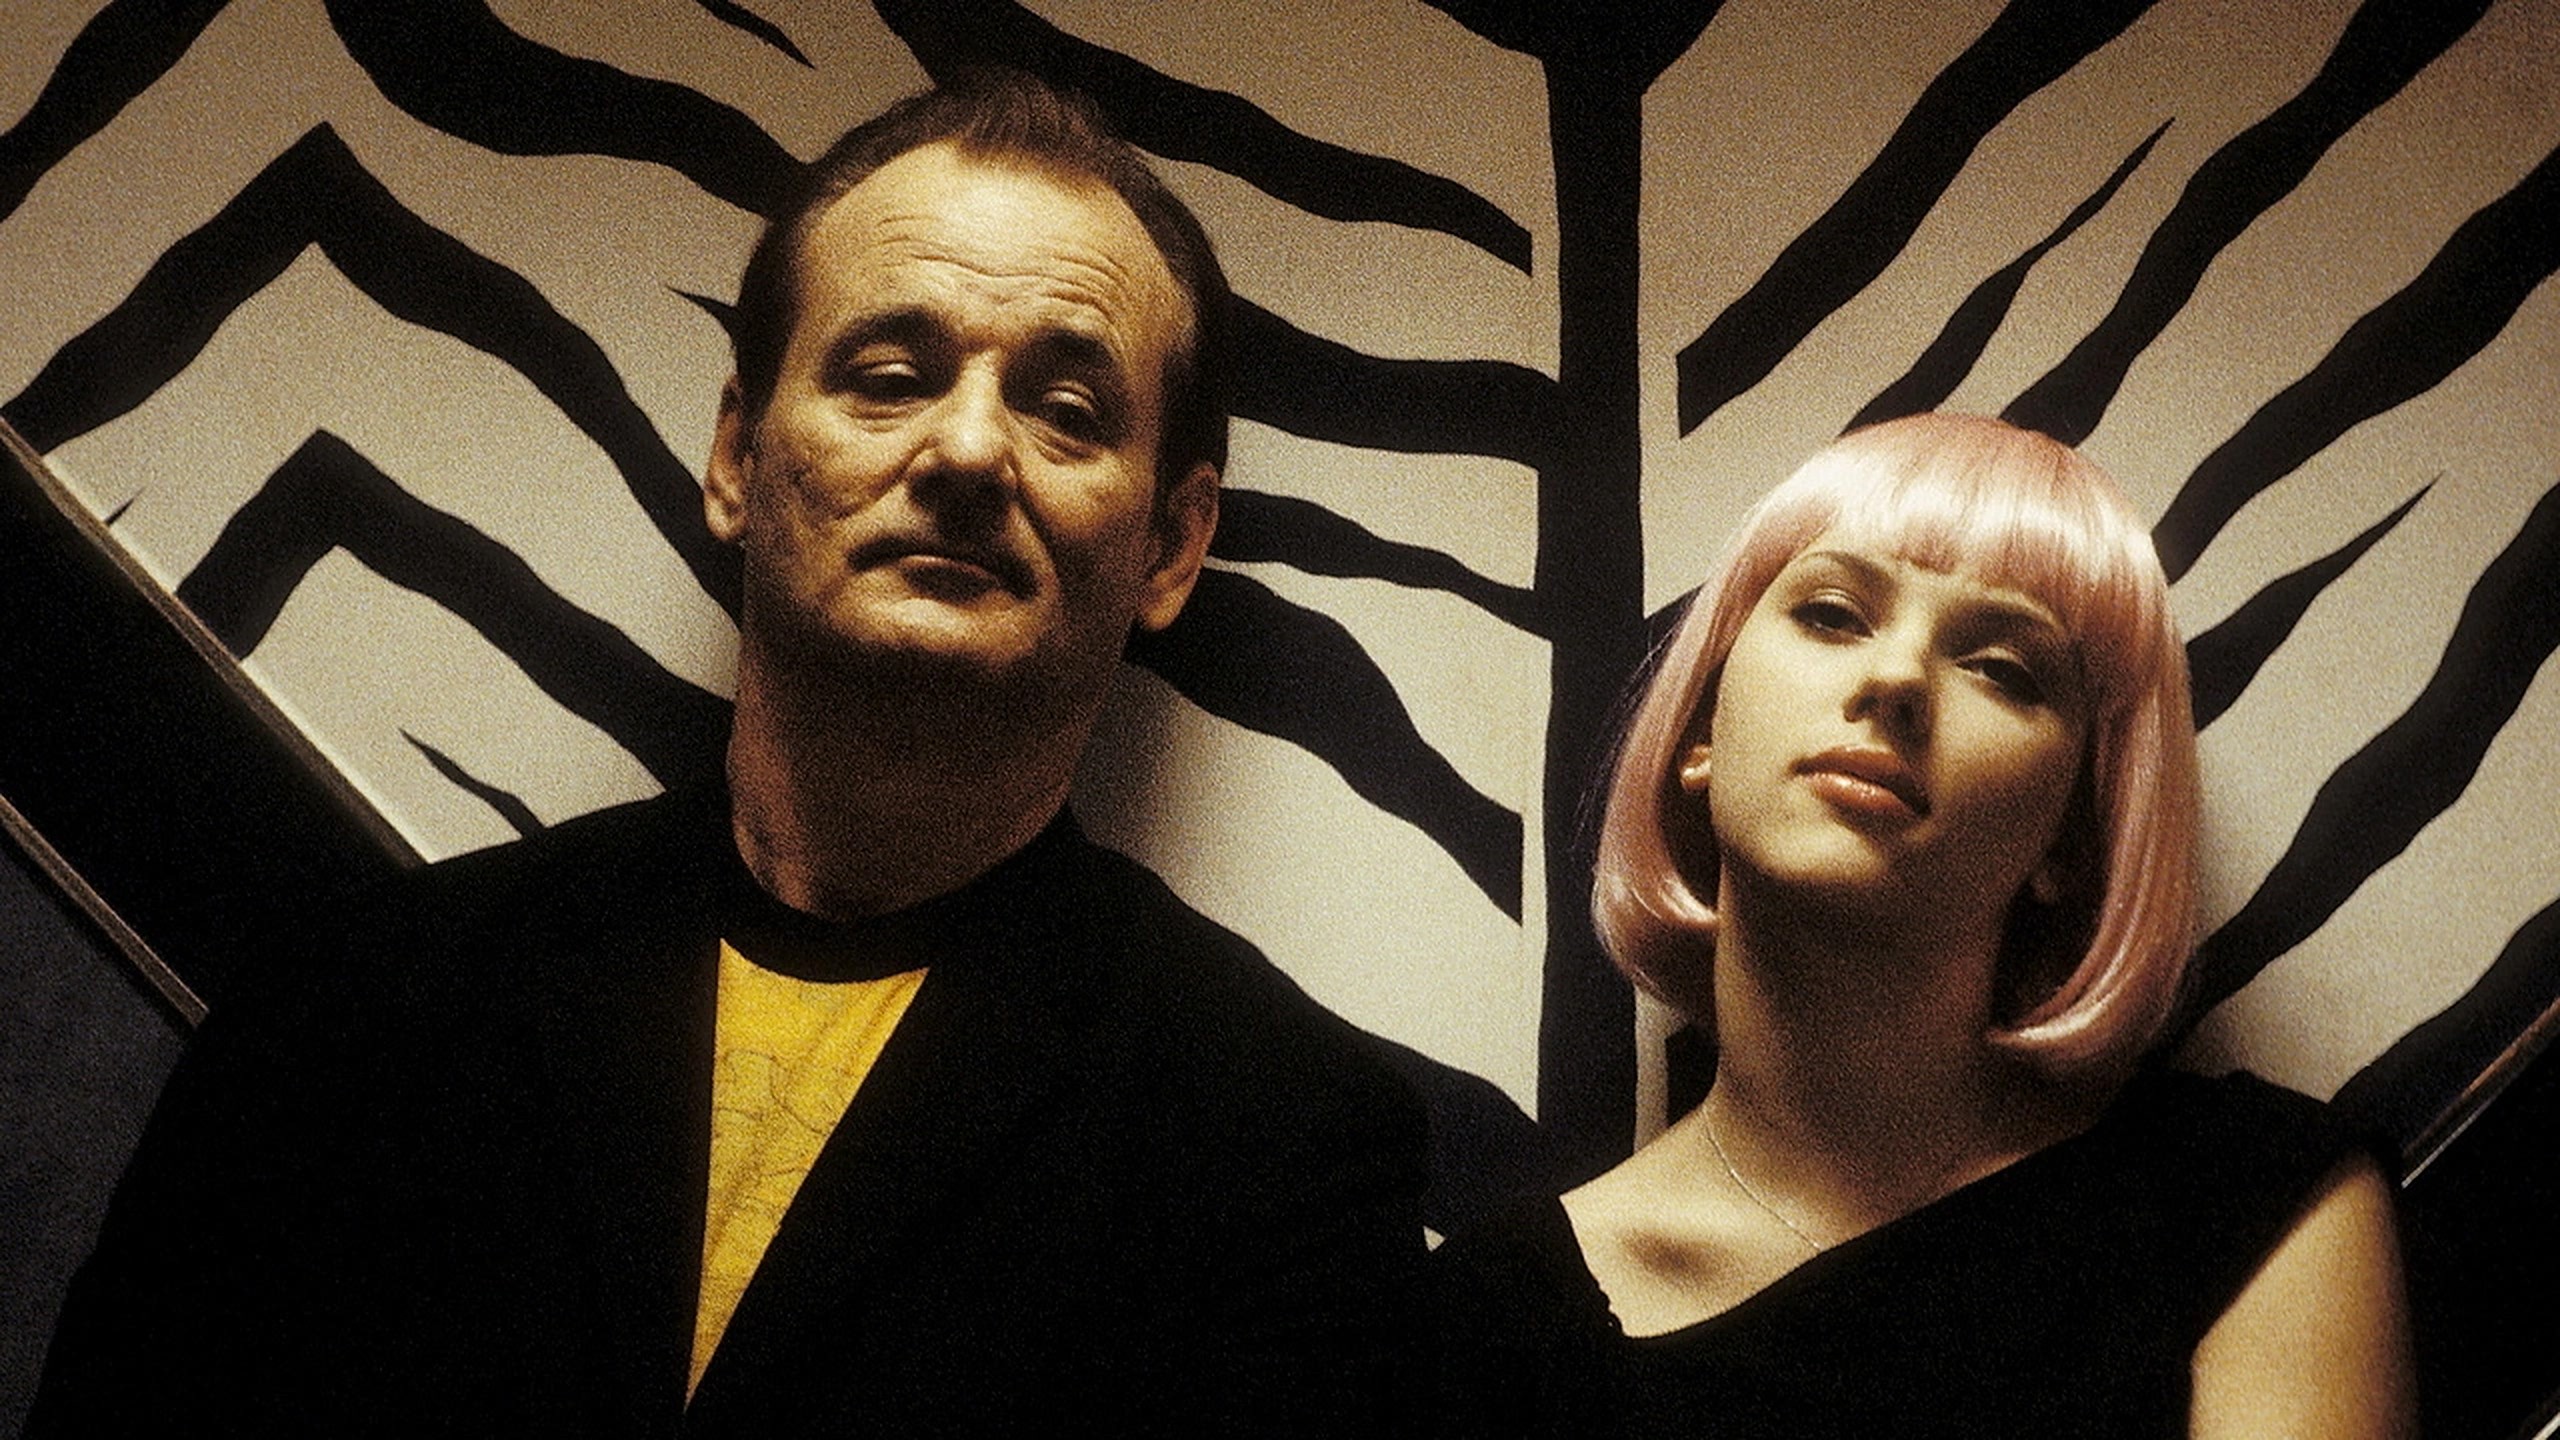 Lost in Translation: Is the Story Based on Sofia Coppola’s Life?